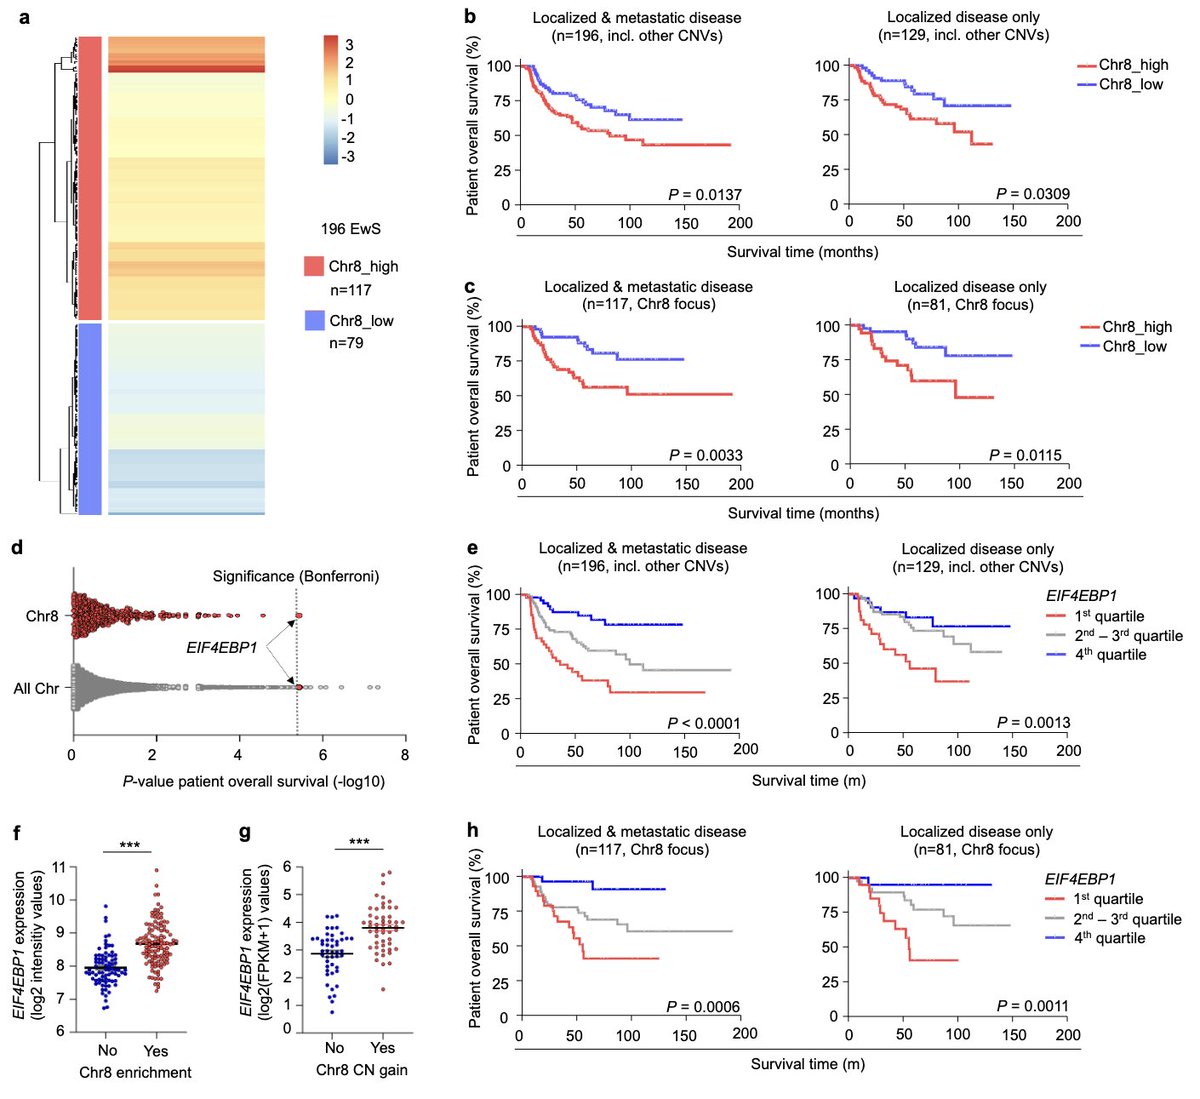 Please RT: chr8 gains are prognostic in #Ewing #sarcoma, especially in absence of other recurrent CNVs. Read our updated @biorxivpreprint to learn how this is mediated via 4E-BP1, which sensitizes for targeted therapy with CDK4/6i.
@KiTZ_HD @DKFZ @NCT_HD 

tinyurl.com/57amtbdp